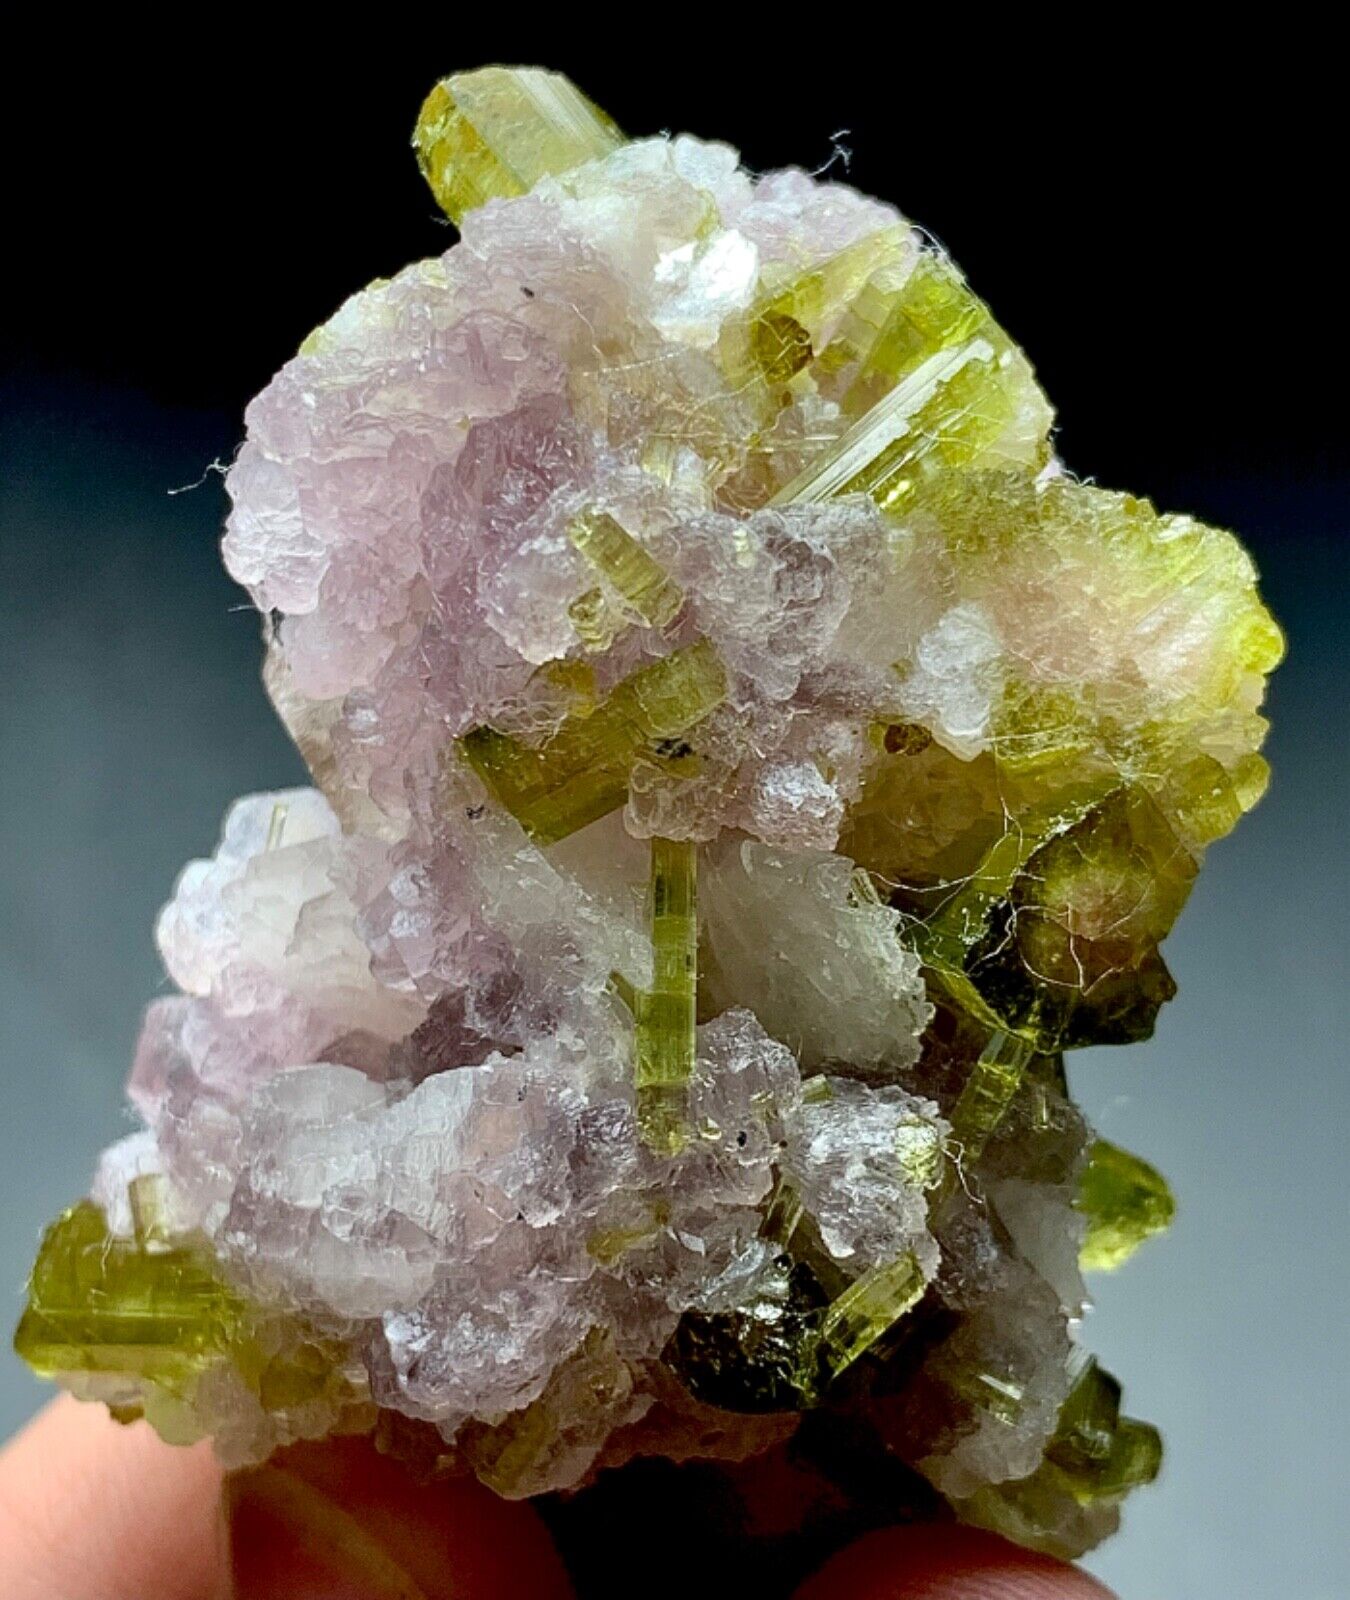 270 Carat Tourmaline Crystal Bunch With Lepidolite Mica From Afghanistan